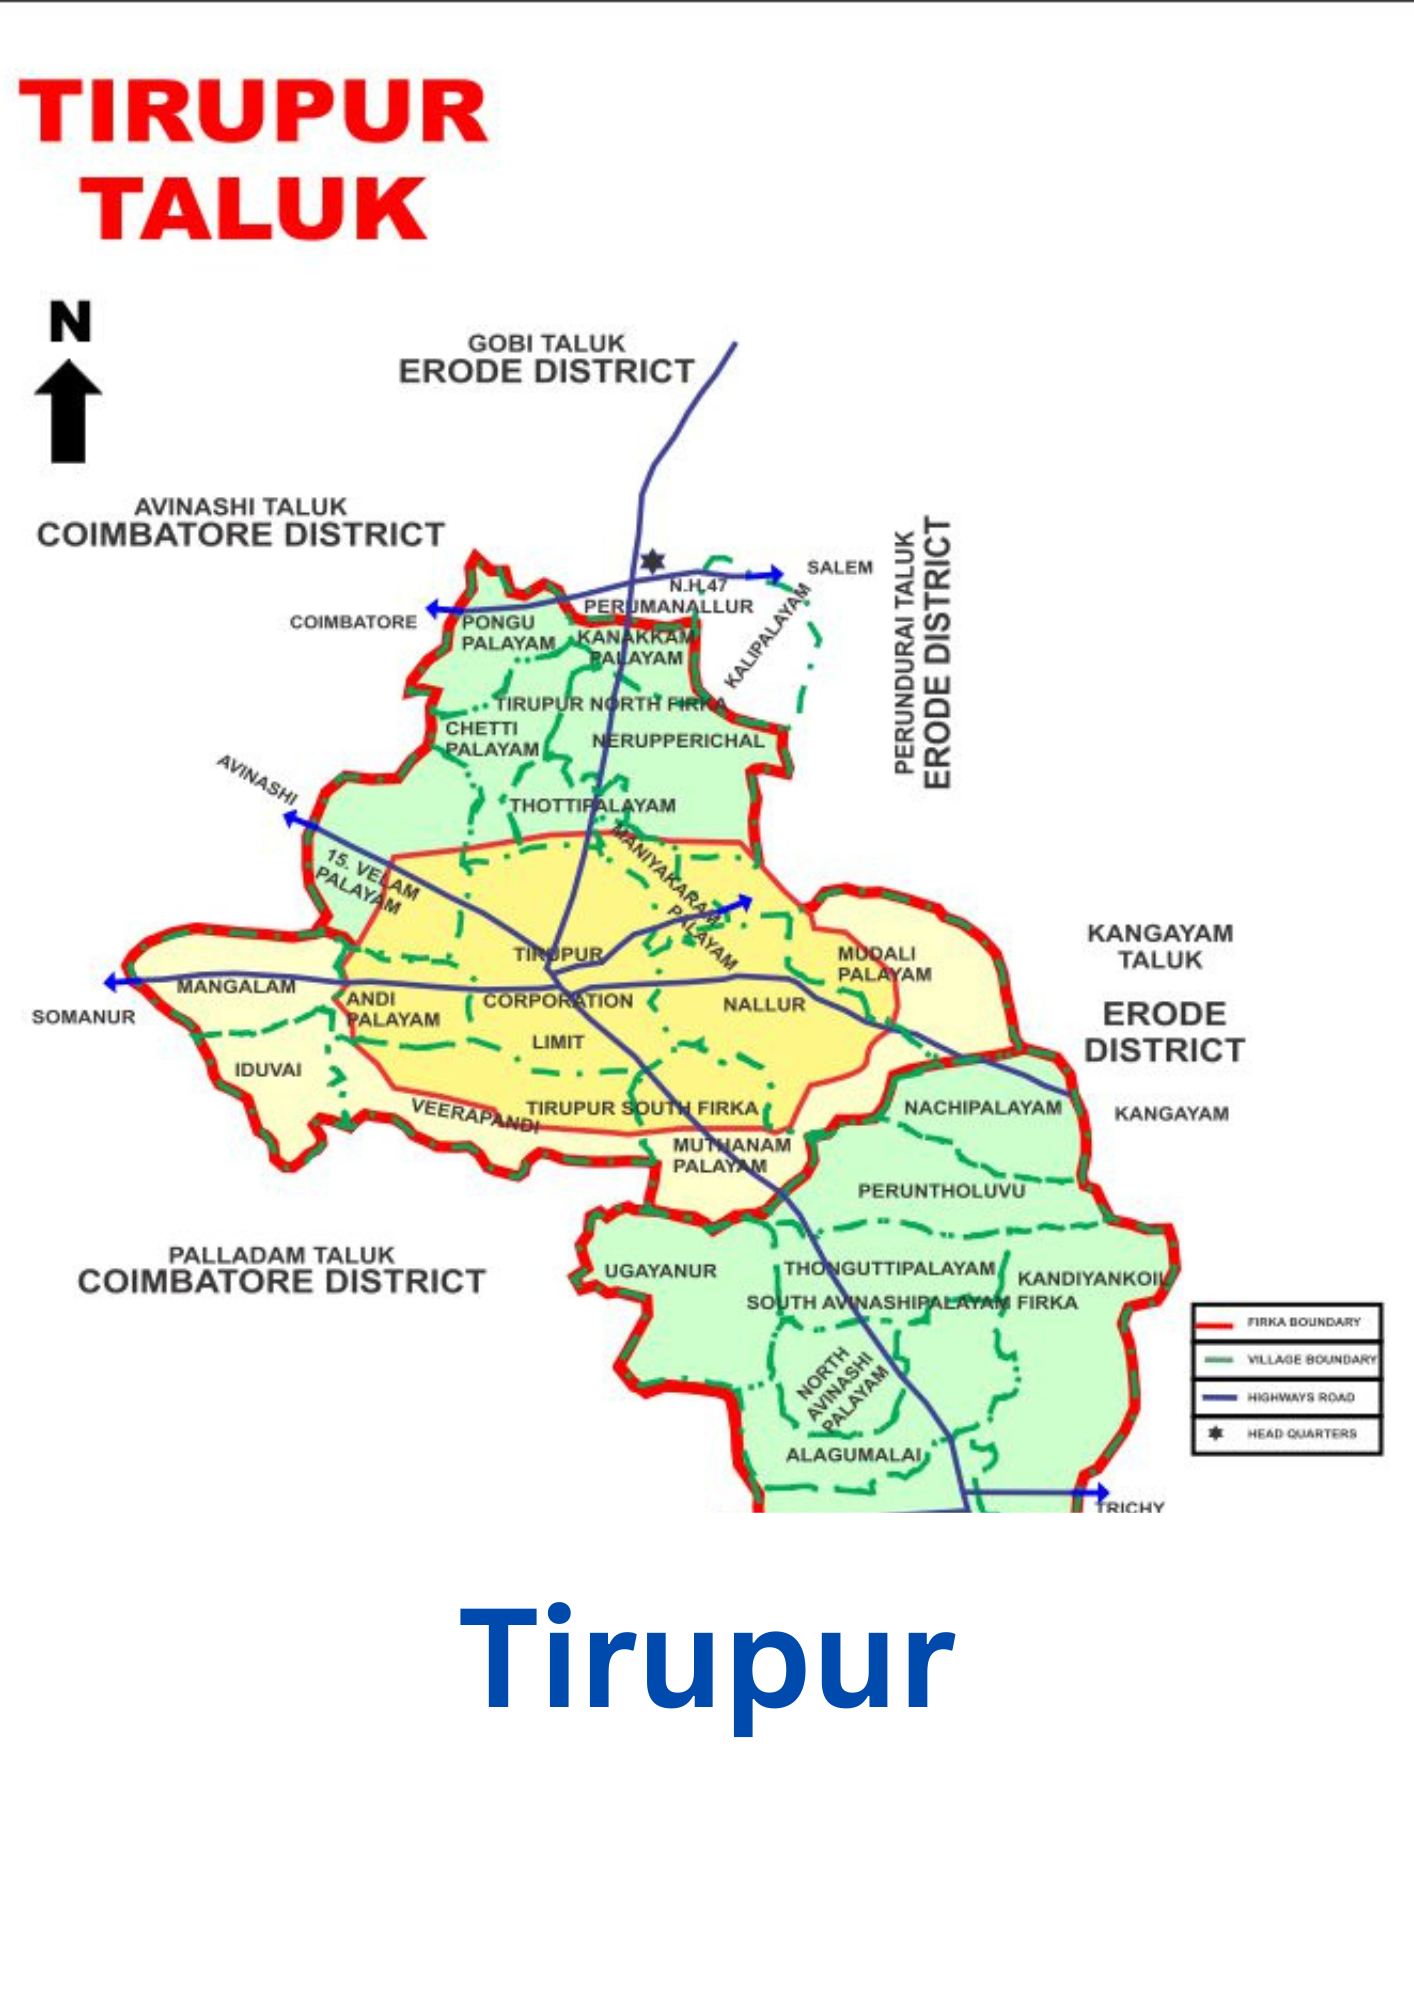 A detailed of Tirupur, a city renowned for its textile manufacturing and exports in Tamil Nadu, India.